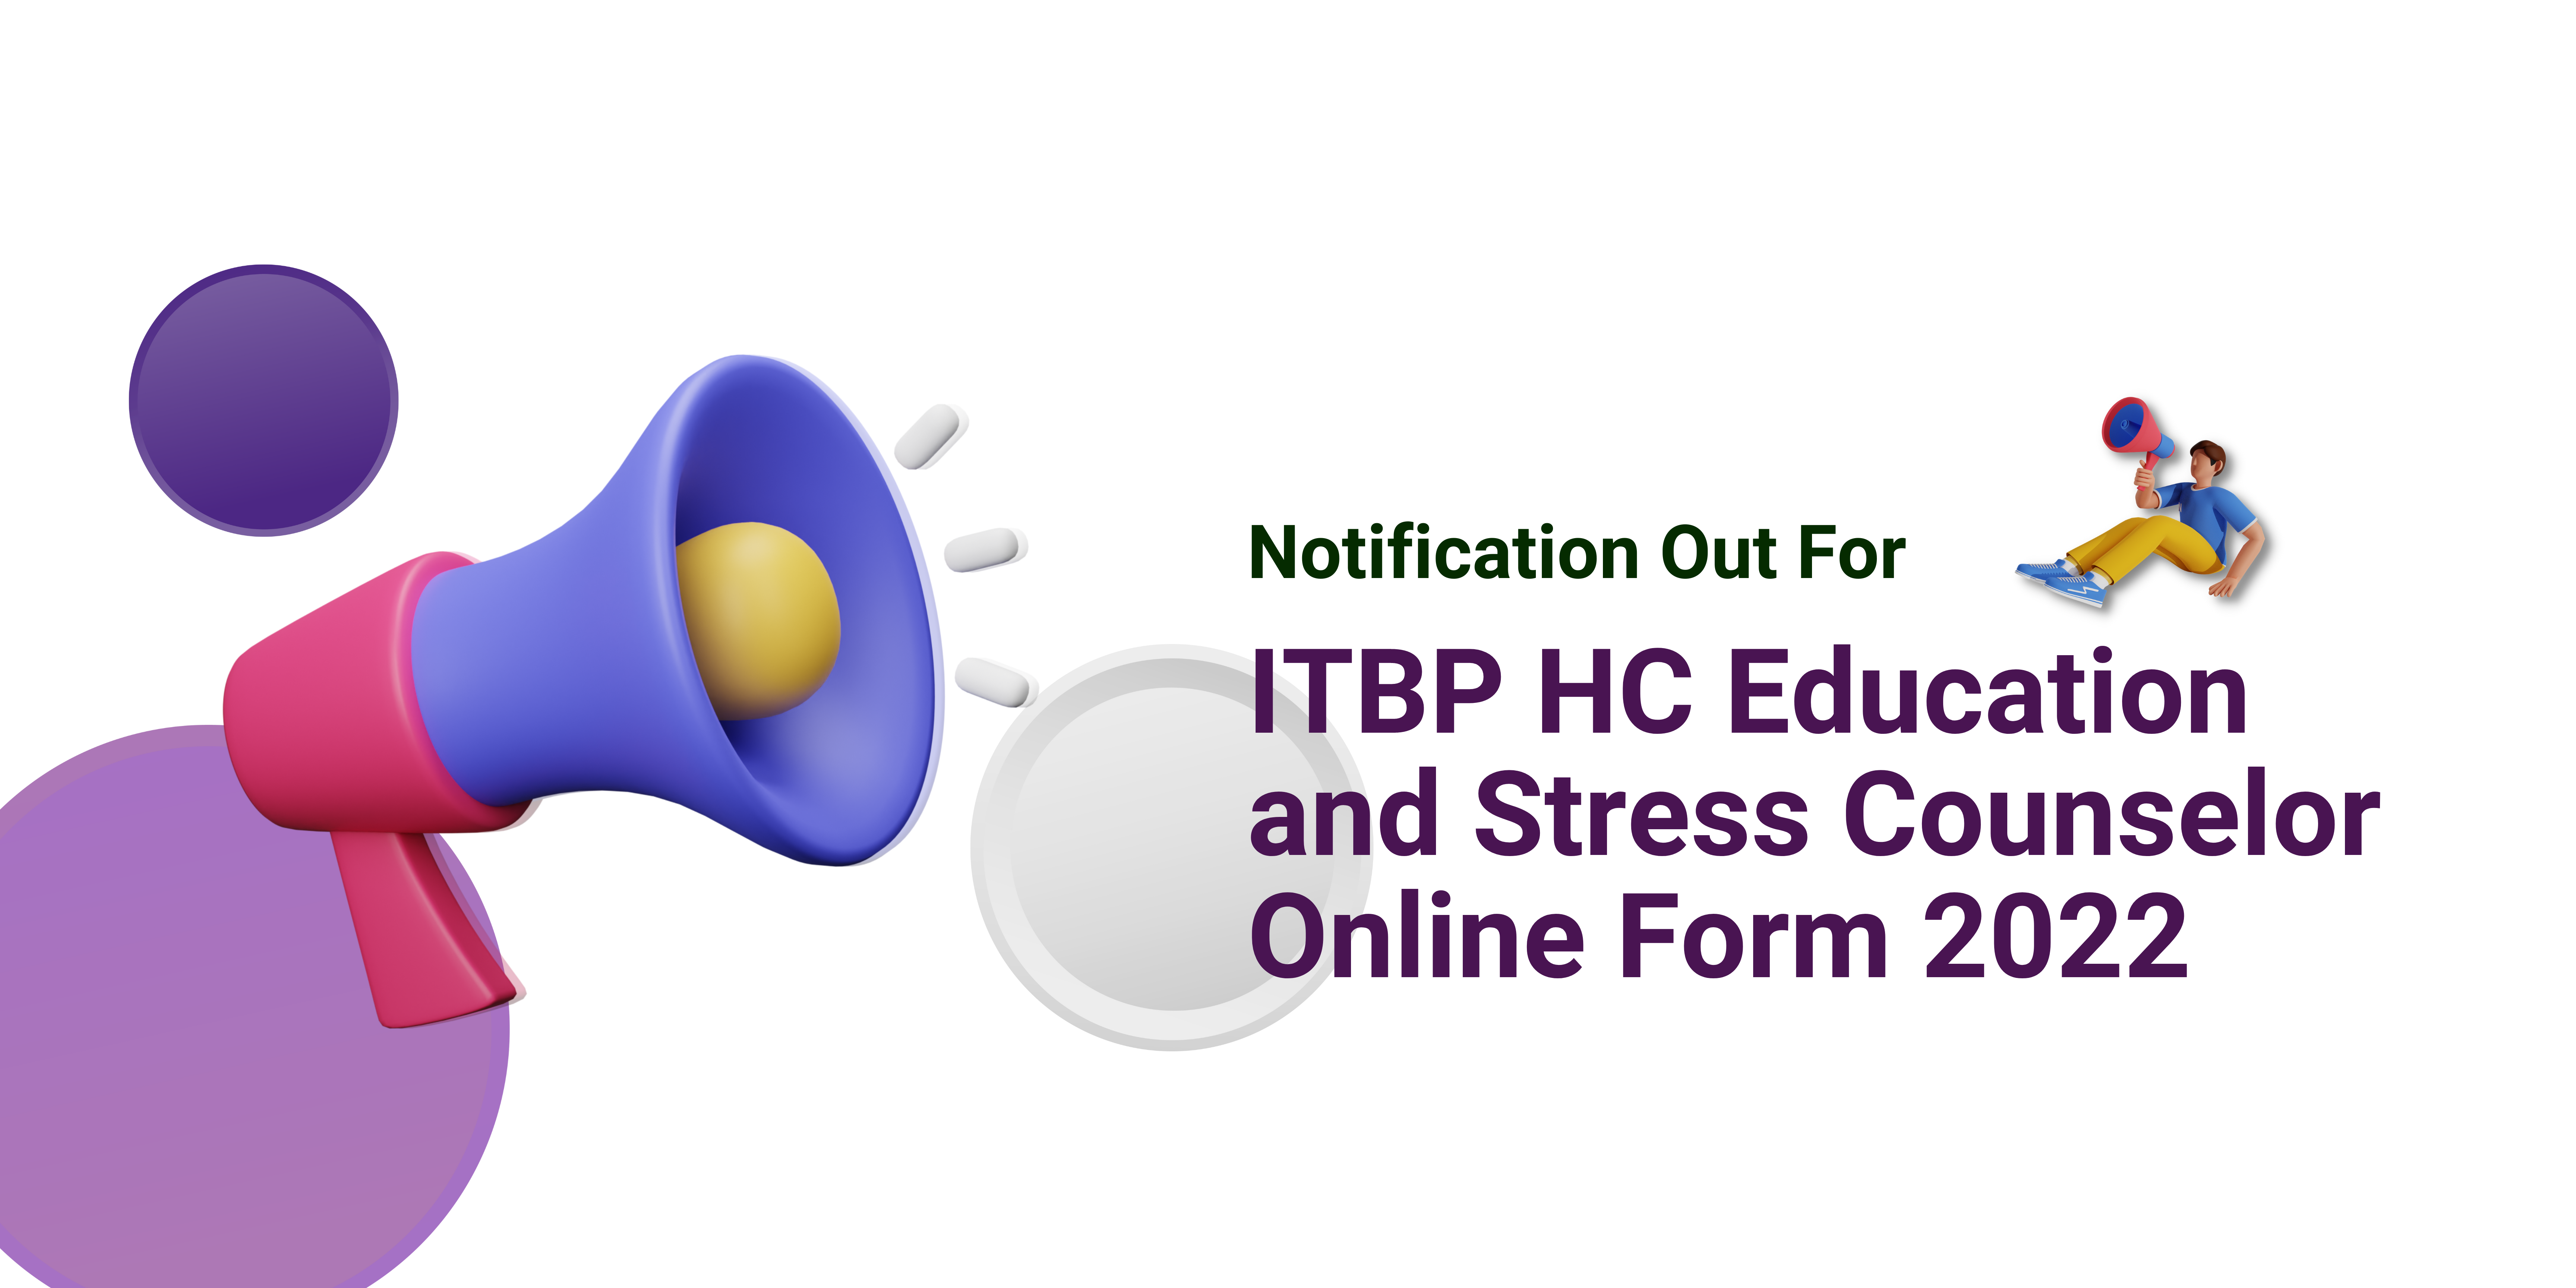 ITBP HC Education and Stress Counselor Online Form 2022